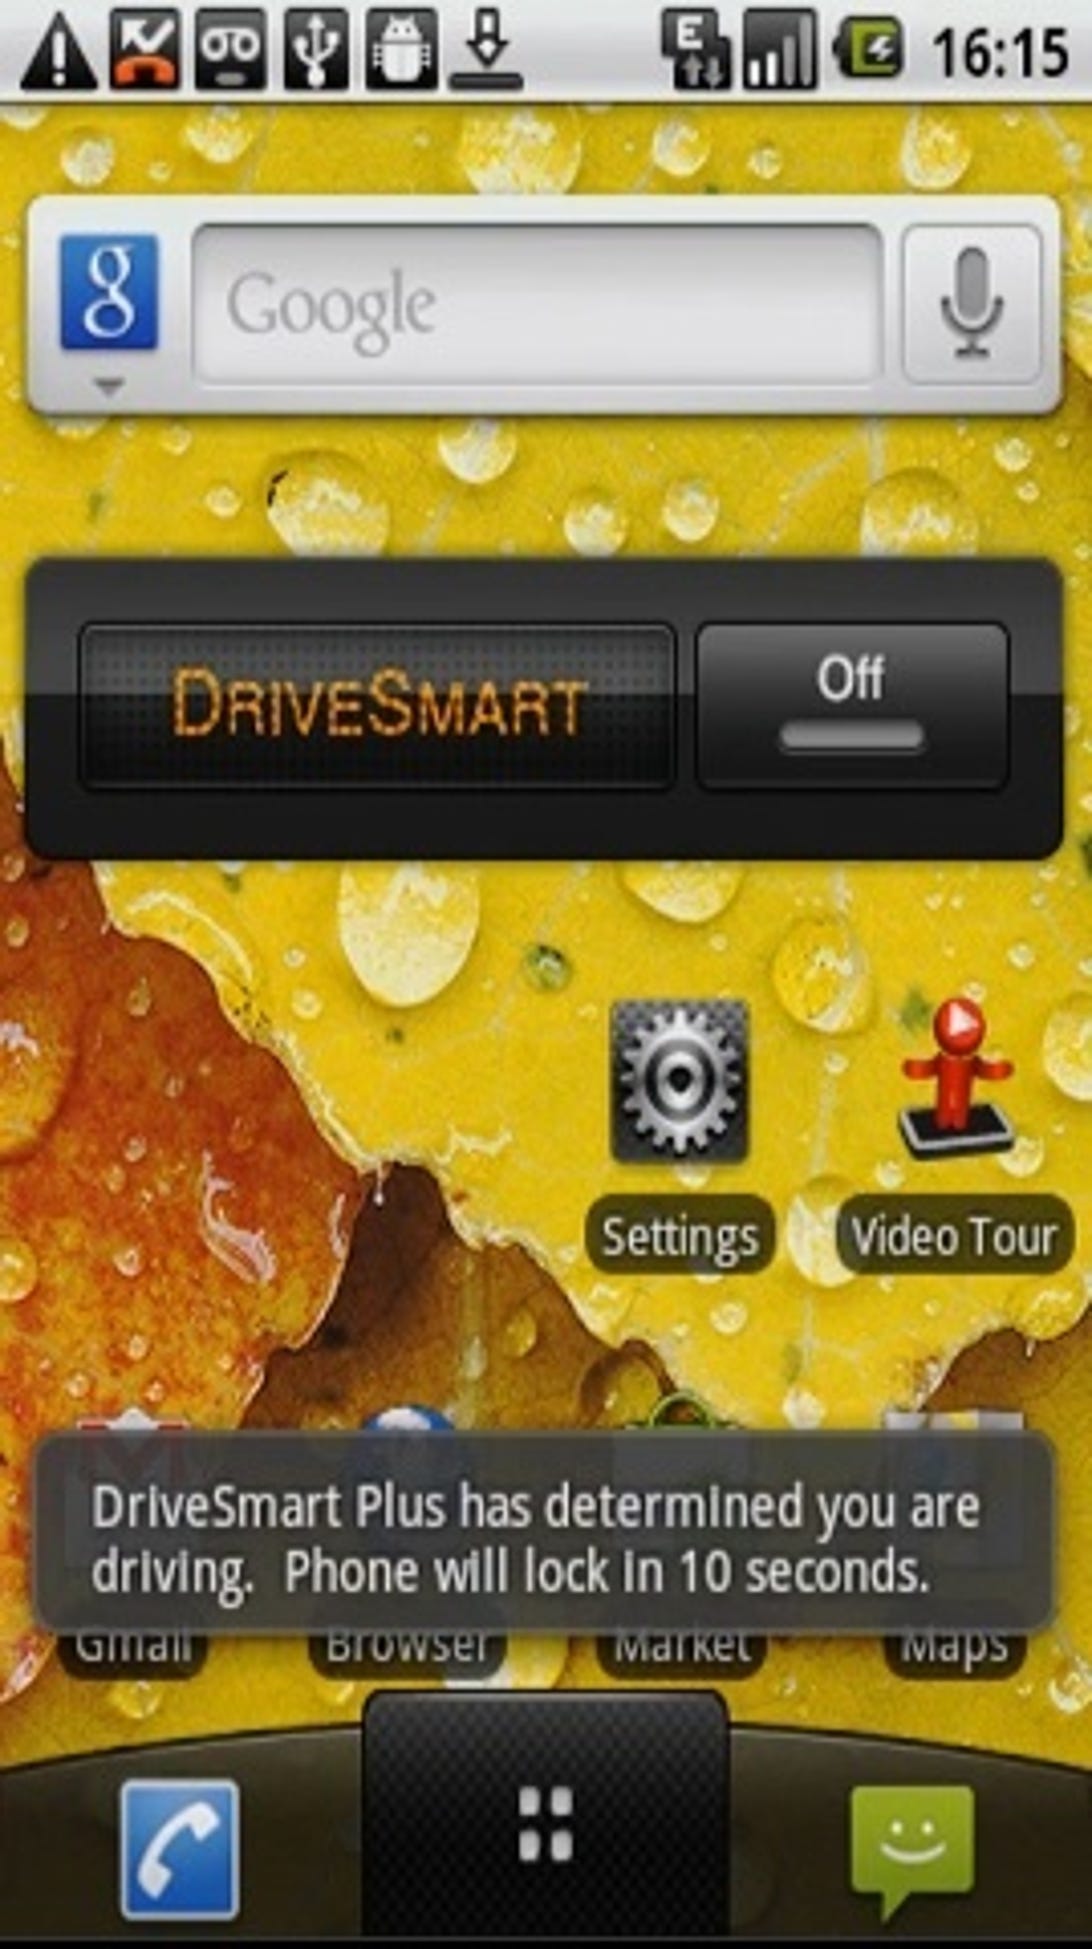 The DriveSafe app for T-Mobile Android phones automatically blocks calls and texts when it detects the user driving.